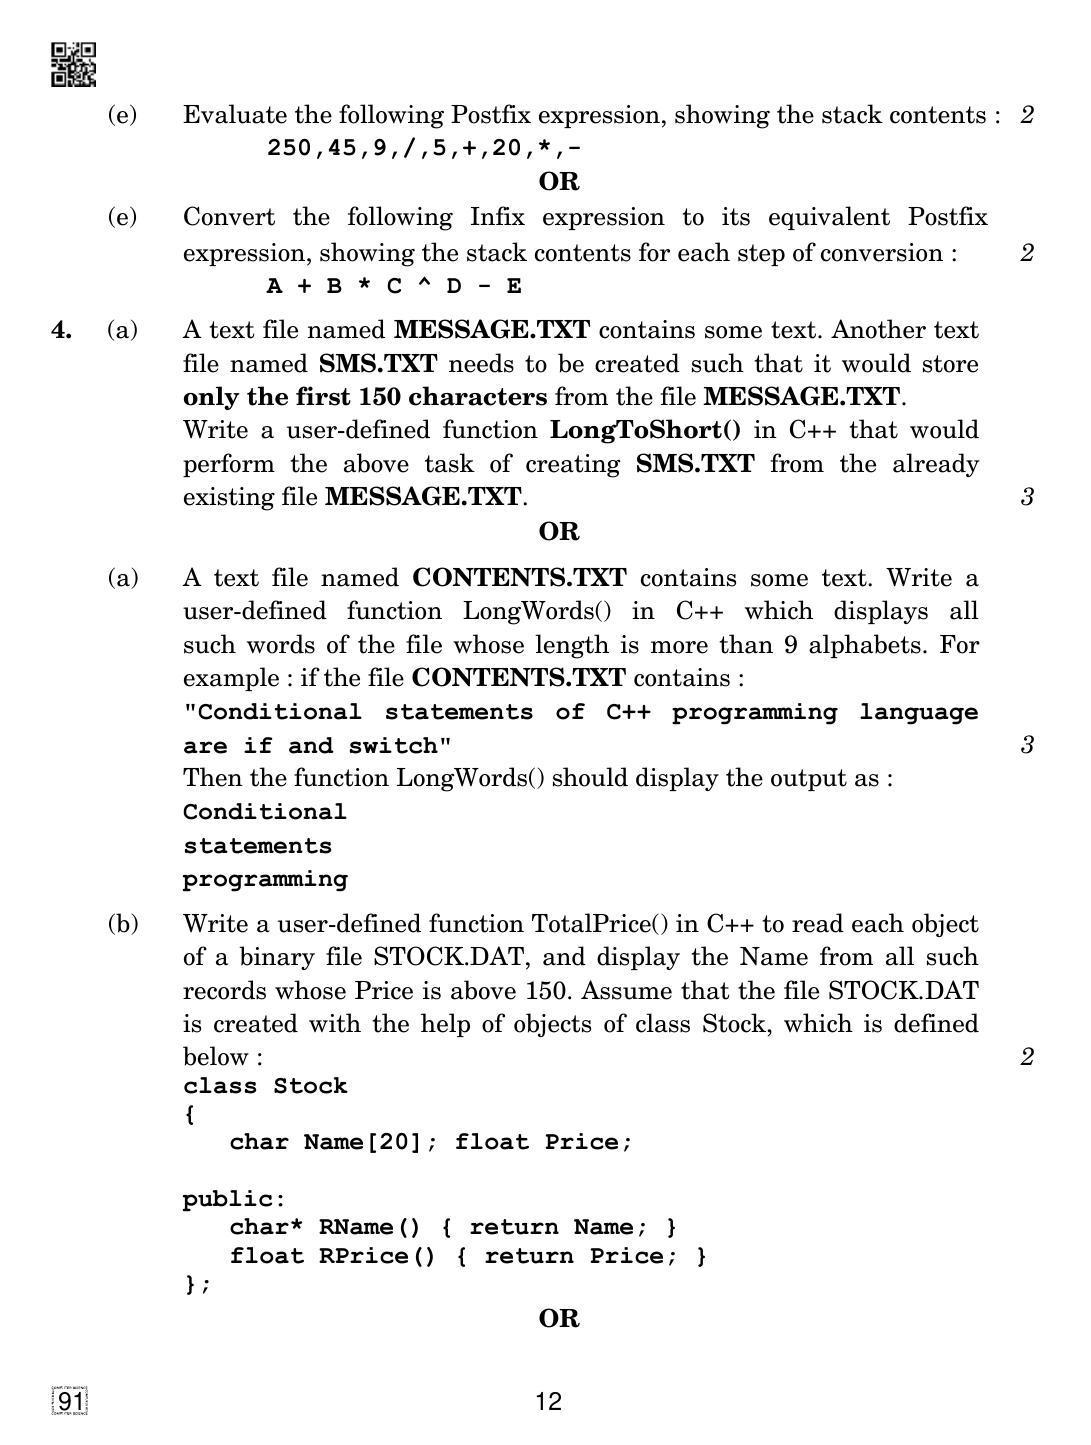 CBSE Class 12 91 Computer Science 2019 Question Paper - Page 12